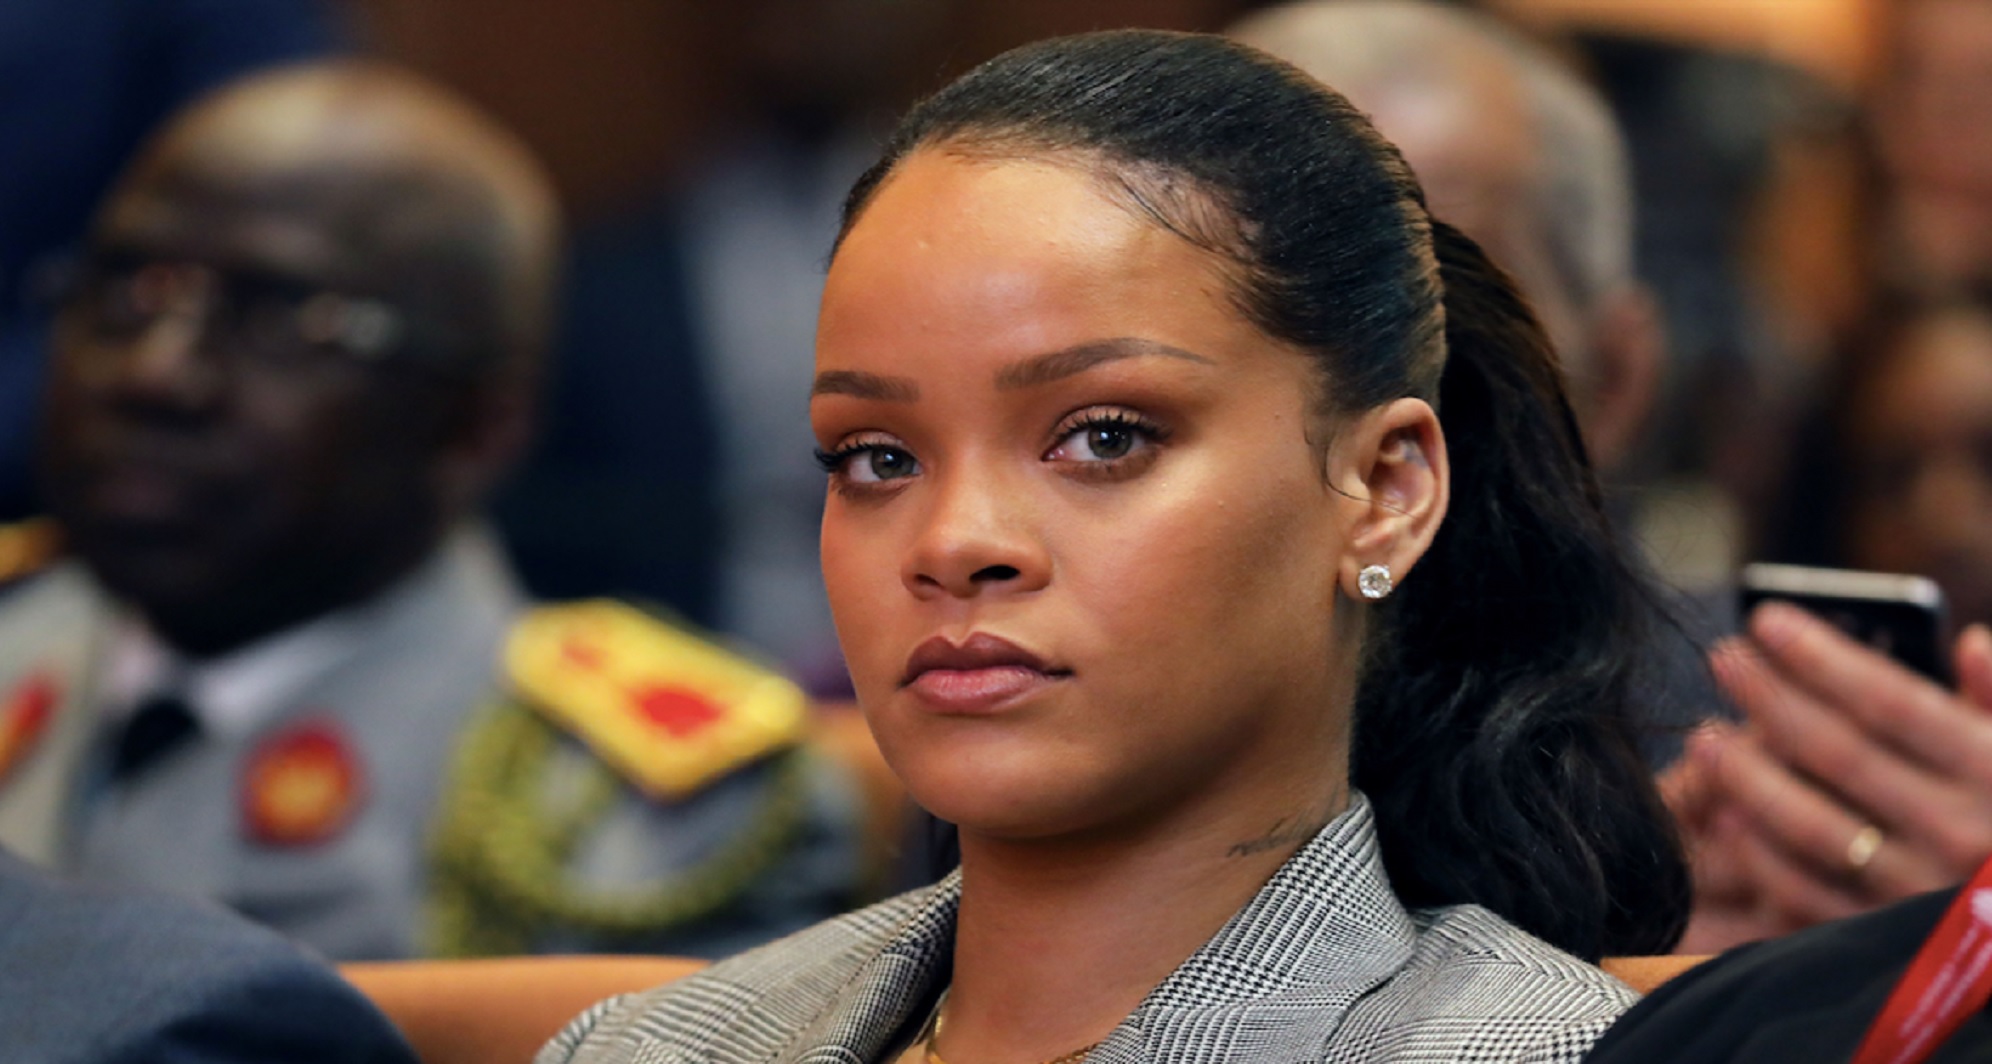 Rihanna Called ‘Irresponsible’ by Indian Government For Her Tweet On Country’s Internal Affairs